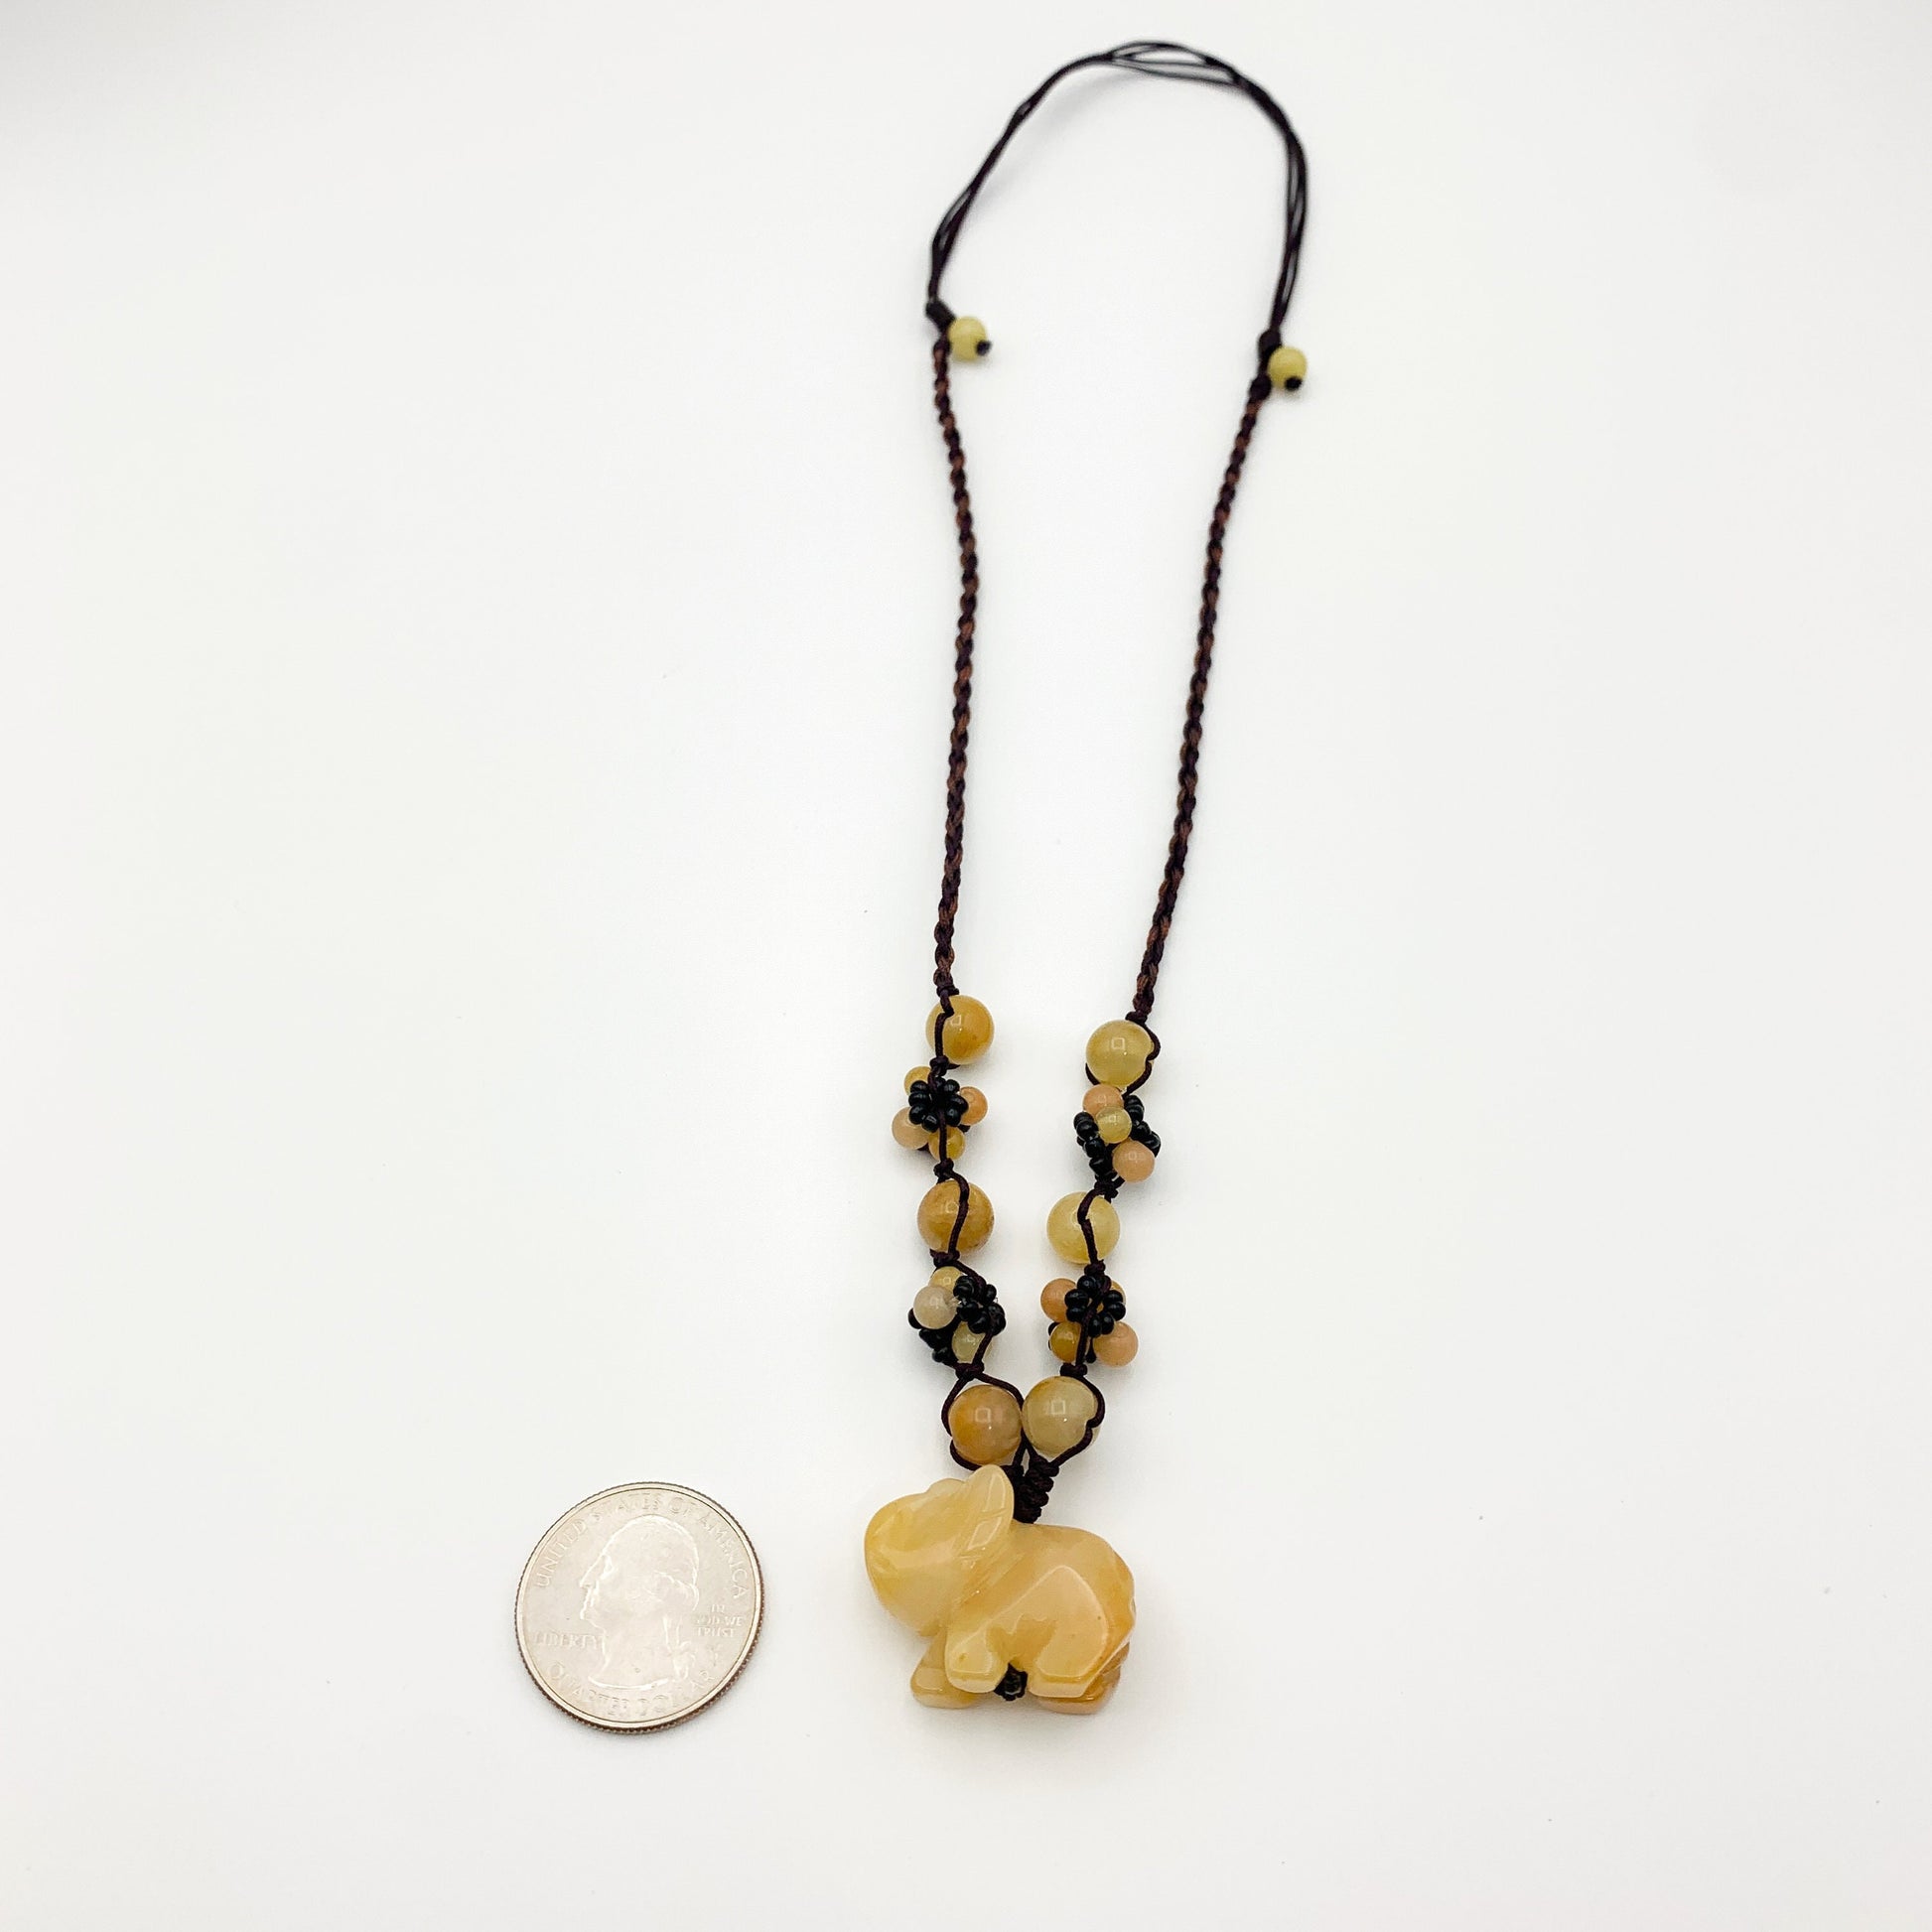 Yellow Jade Elephant Carved Necklace, YW-0110-1646608140 - AriaDesignCollection